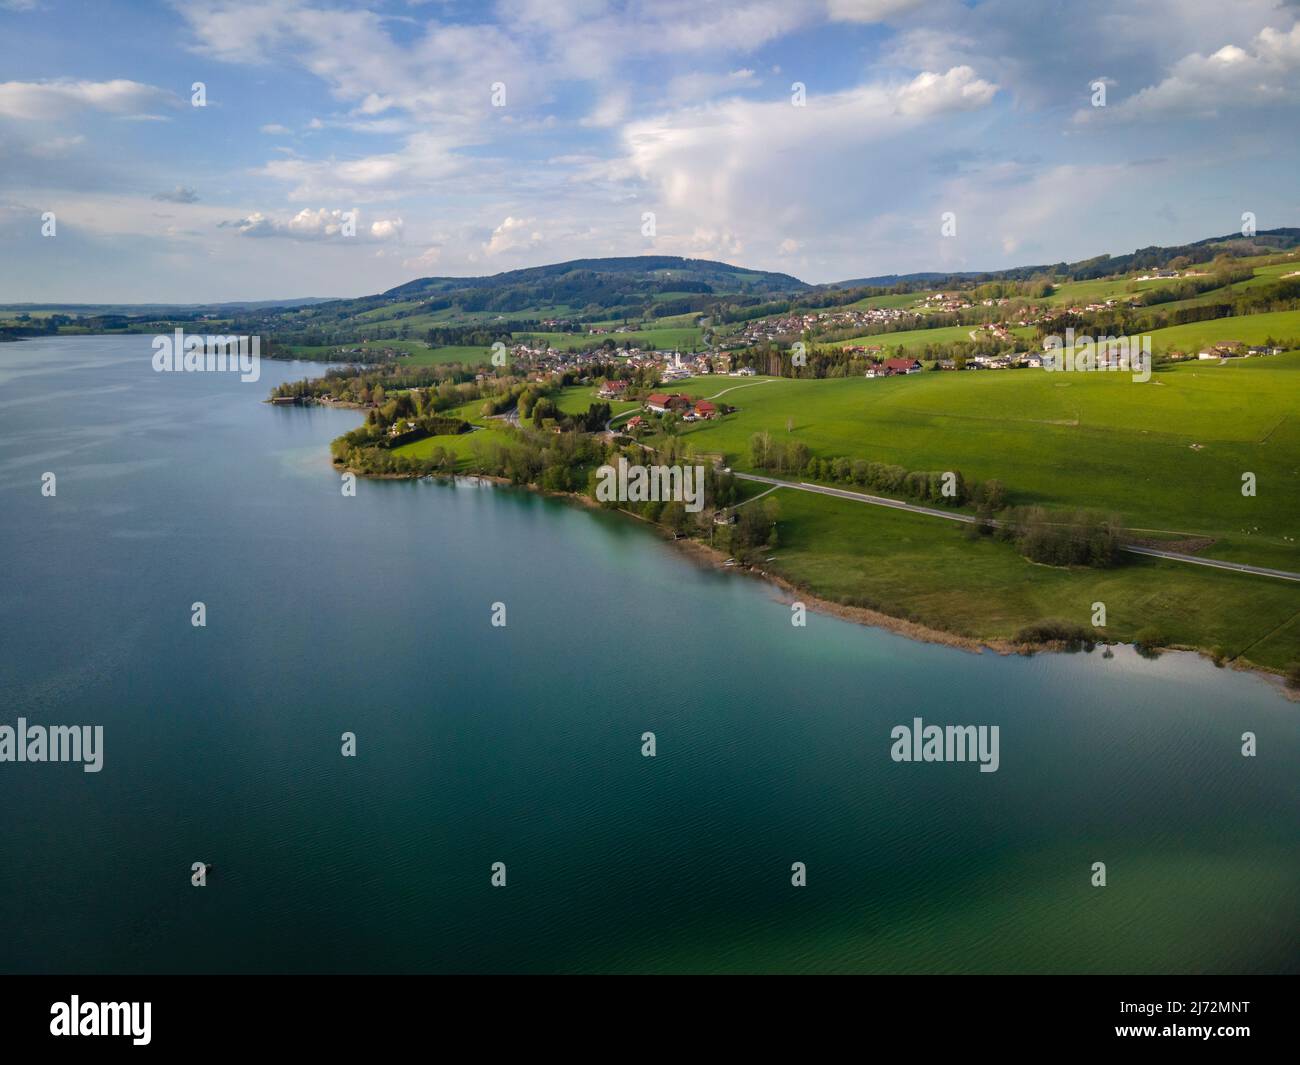 Wonderful places for recreation at the Irrsee in Austria Stock Photo